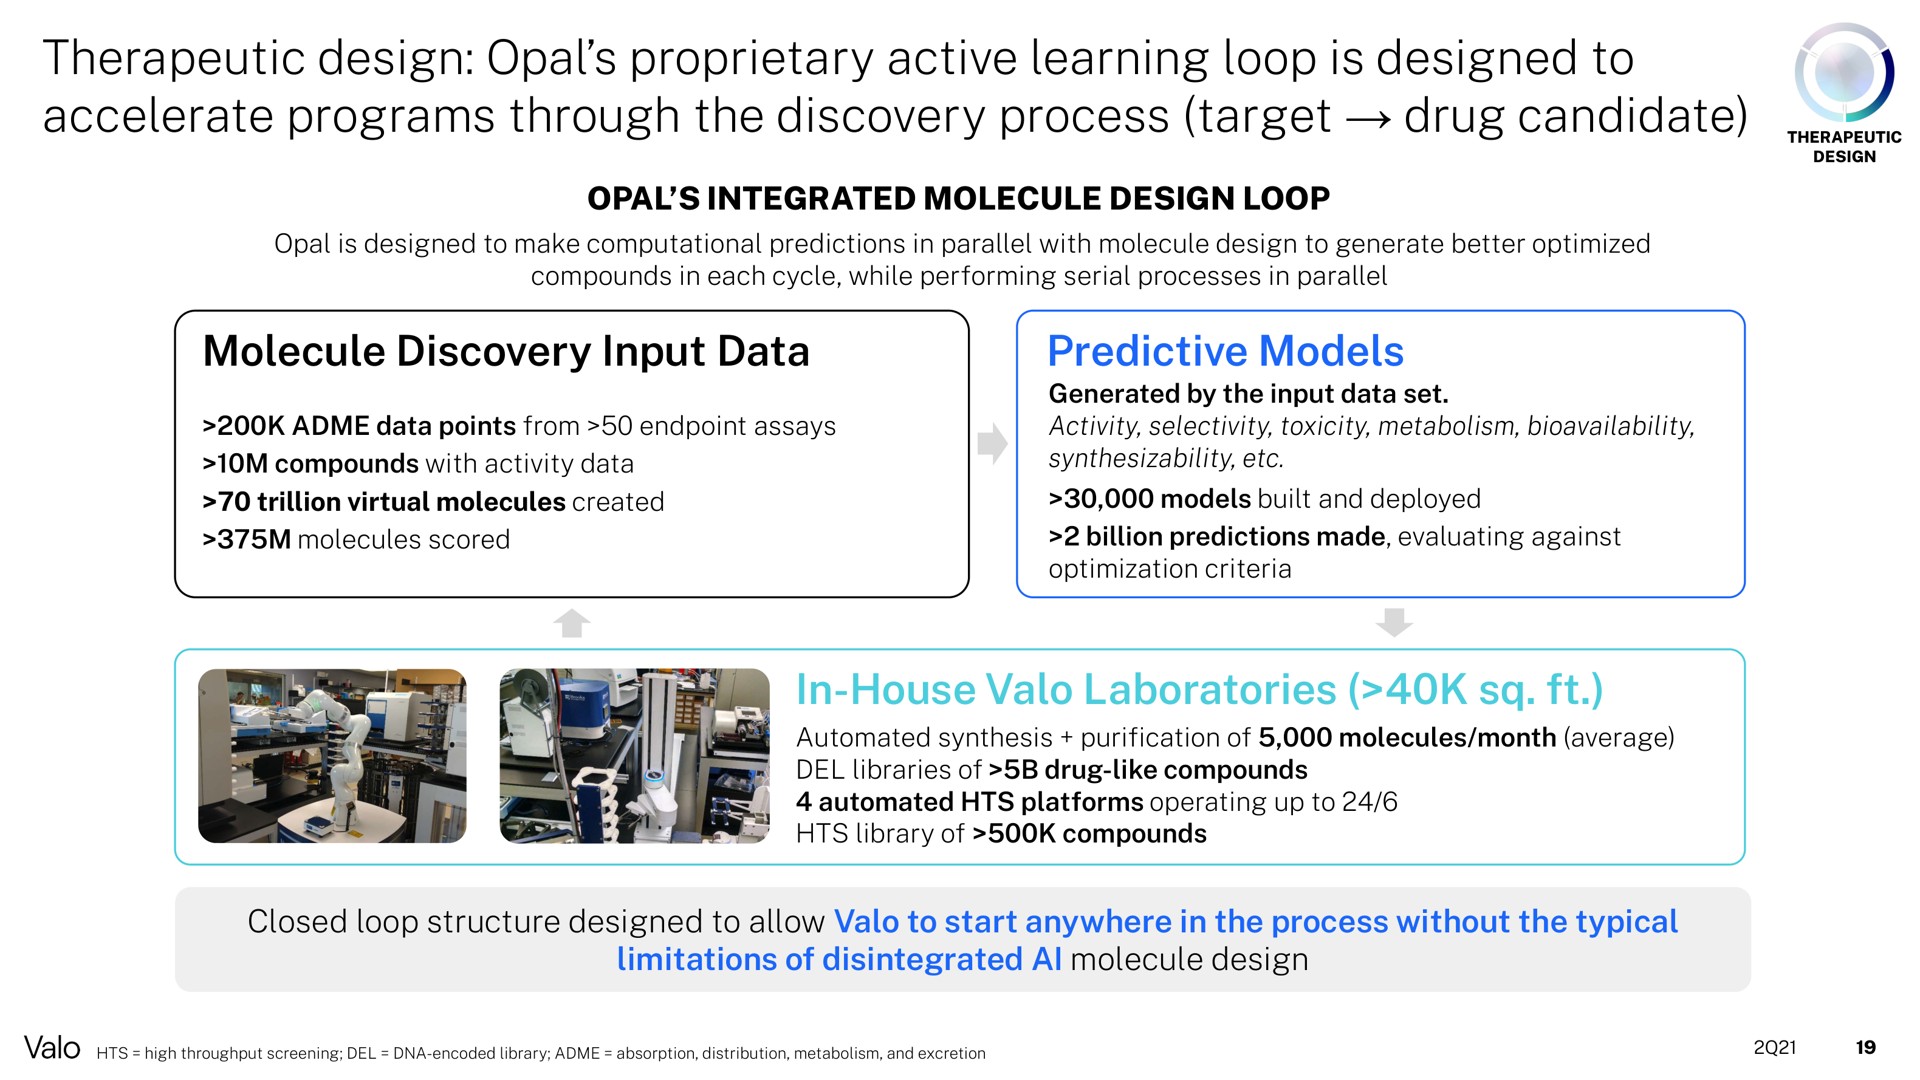 therapeutic design opal proprietary active learning loop is designed to accelerate programs through the discovery process target drug candidate molecule discovery input data predictive models in house laboratories | Valo